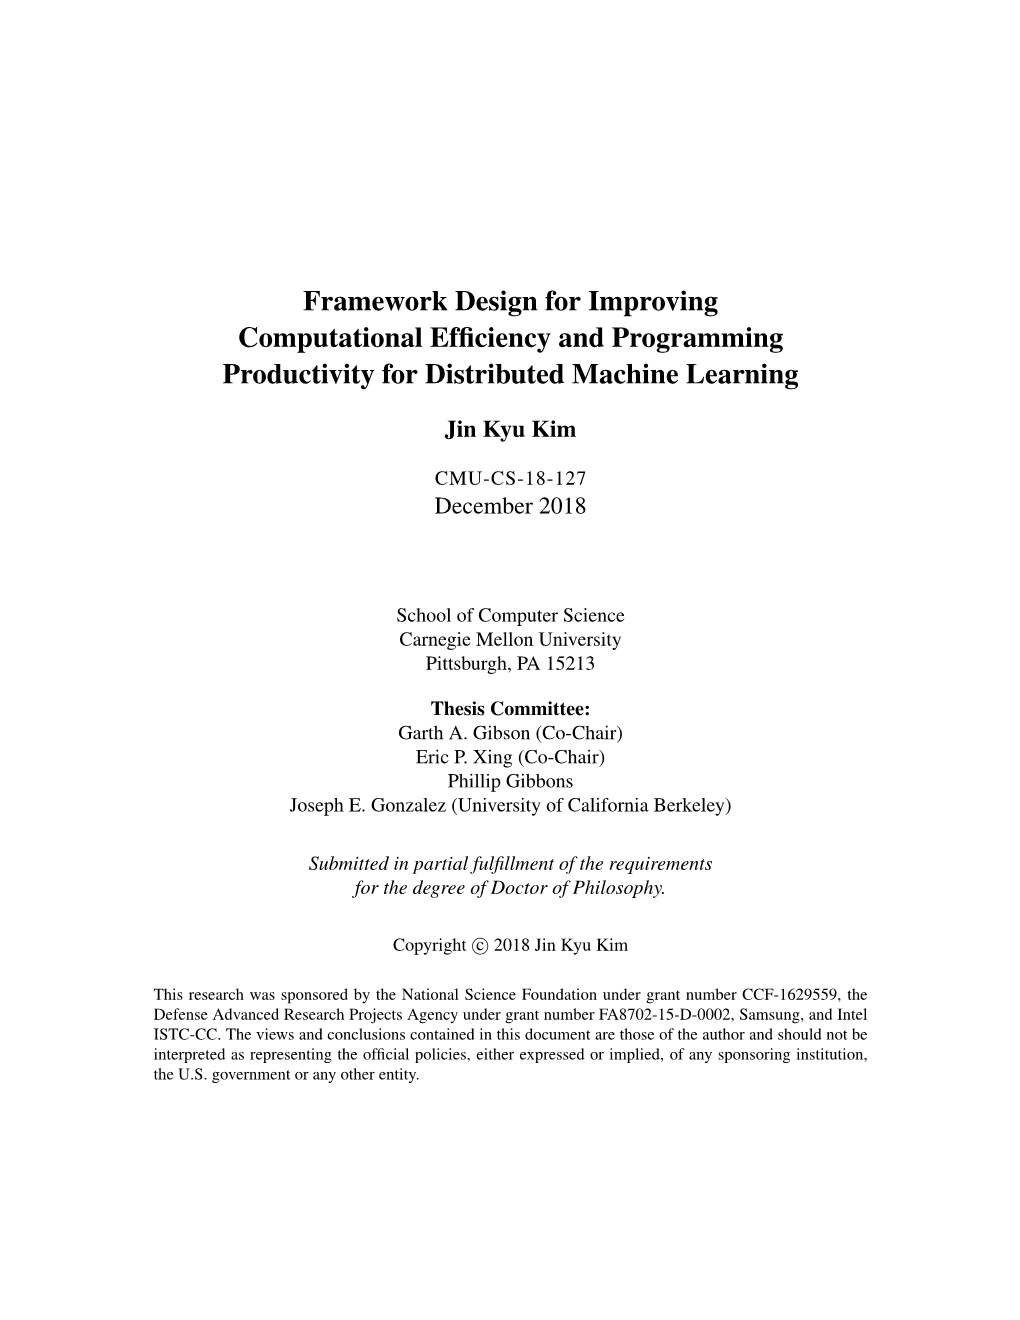 Framework Design for Improving Computational Efficiency and Programming Productivity for Distributed Machine Learning